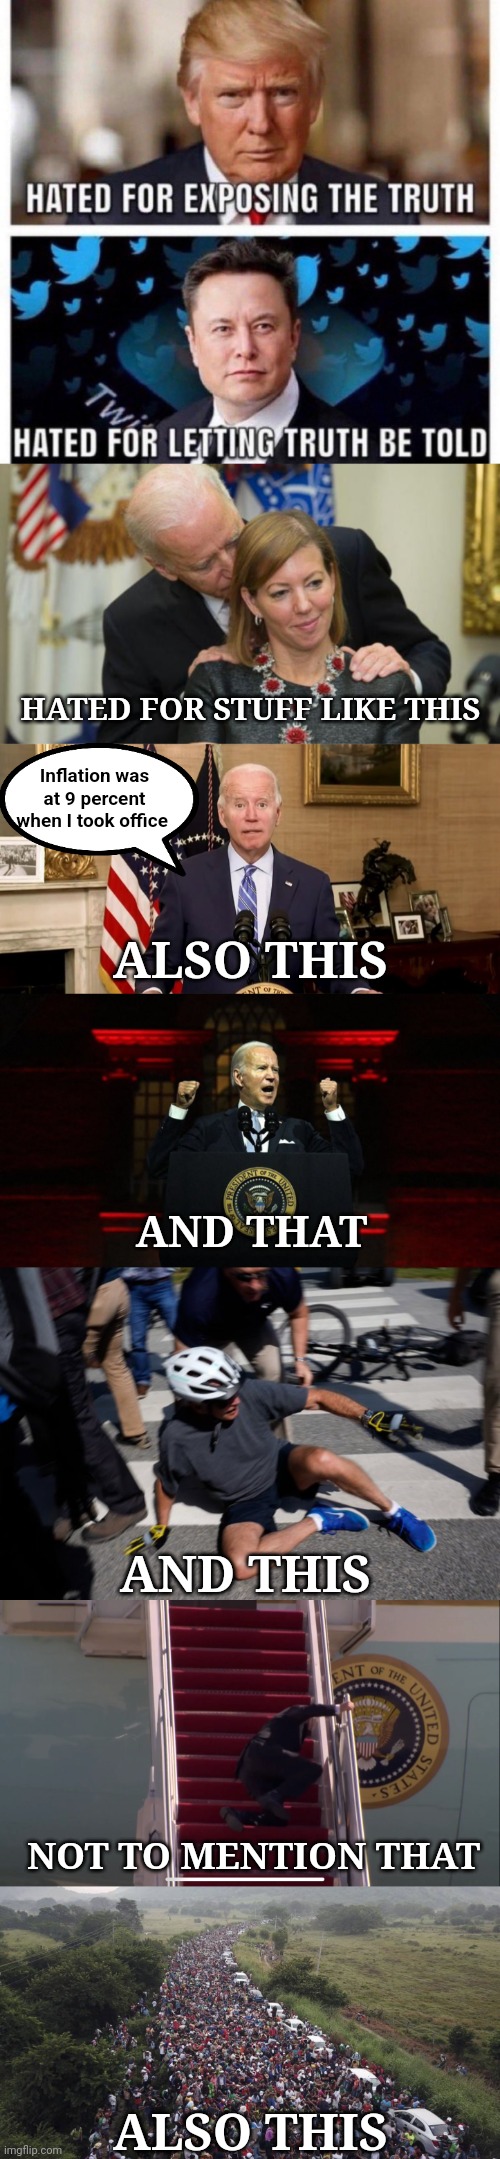 HATED FOR STUFF LIKE THIS; Inflation was at 9 percent when I took office; ALSO THIS; AND THAT; AND THIS; NOT TO MENTION THAT; ALSO THIS | image tagged in creepy joe biden,you can't be blank and also be blank,joe biden creepy hitler speech,joe biden bike crash,biden border crisis | made w/ Imgflip meme maker